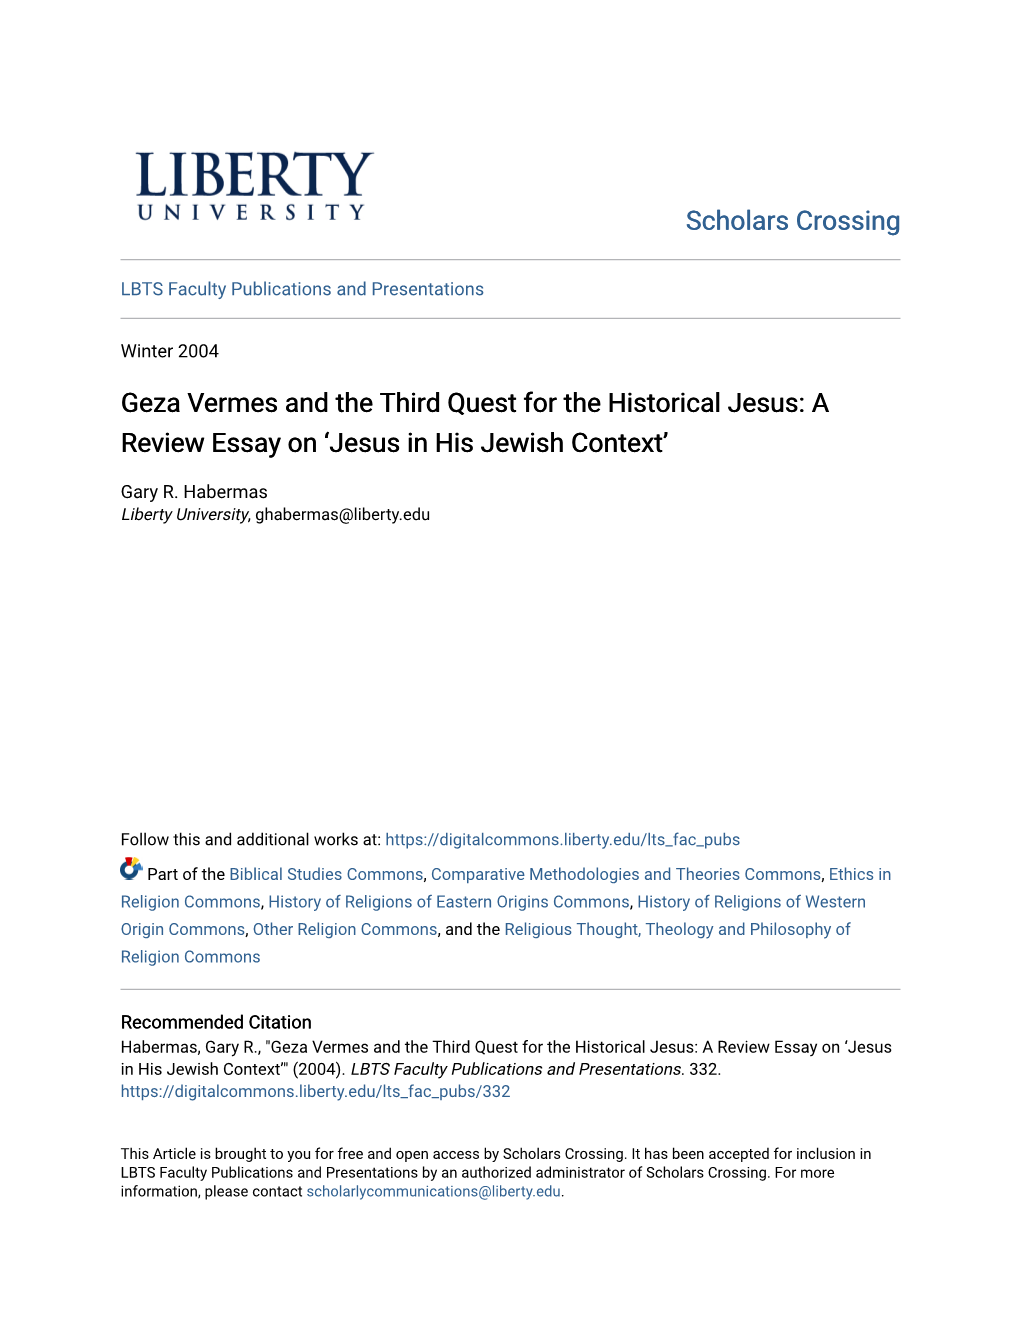 Geza Vermes and the Third Quest for the Historical Jesus: a Review Essay on ‘Jesus in His Jewish Context’